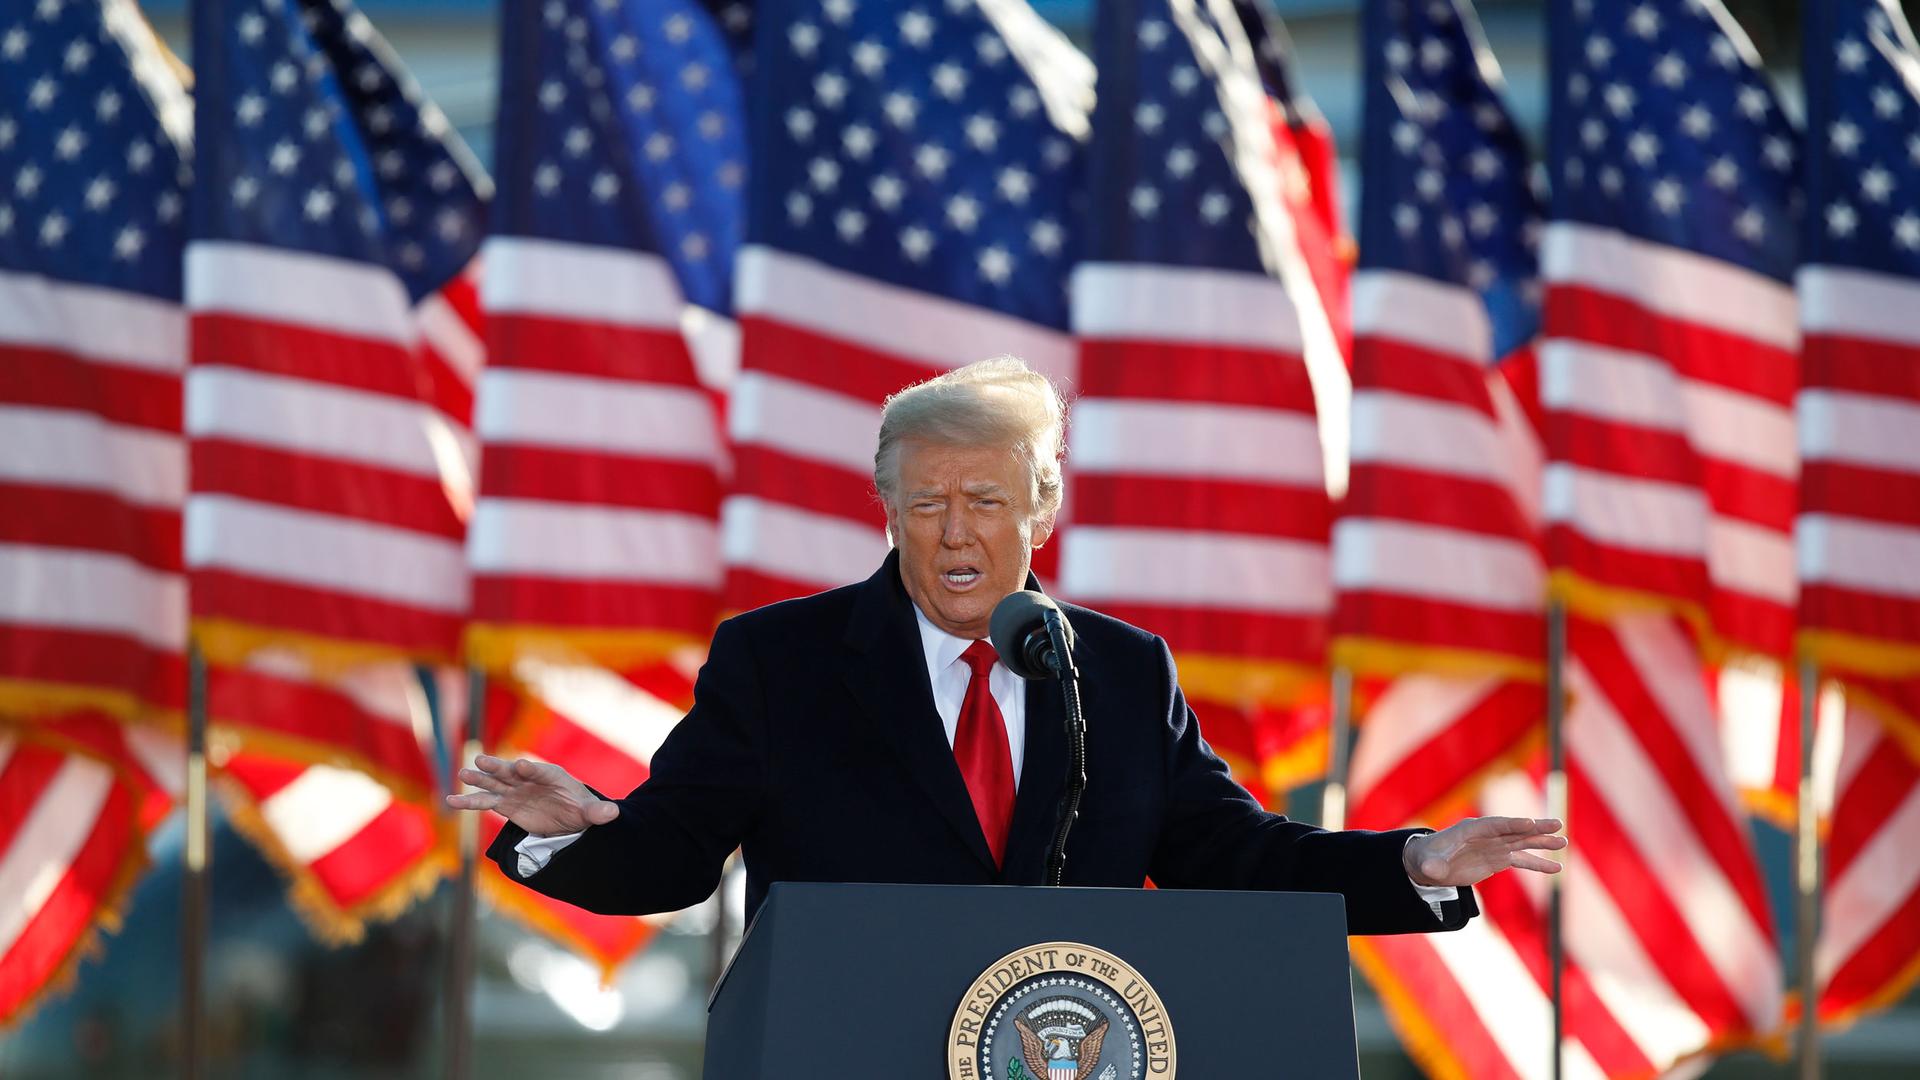 Donald Trump is shown wearing a dark suit overcoat and red tie with several US flags in the background.